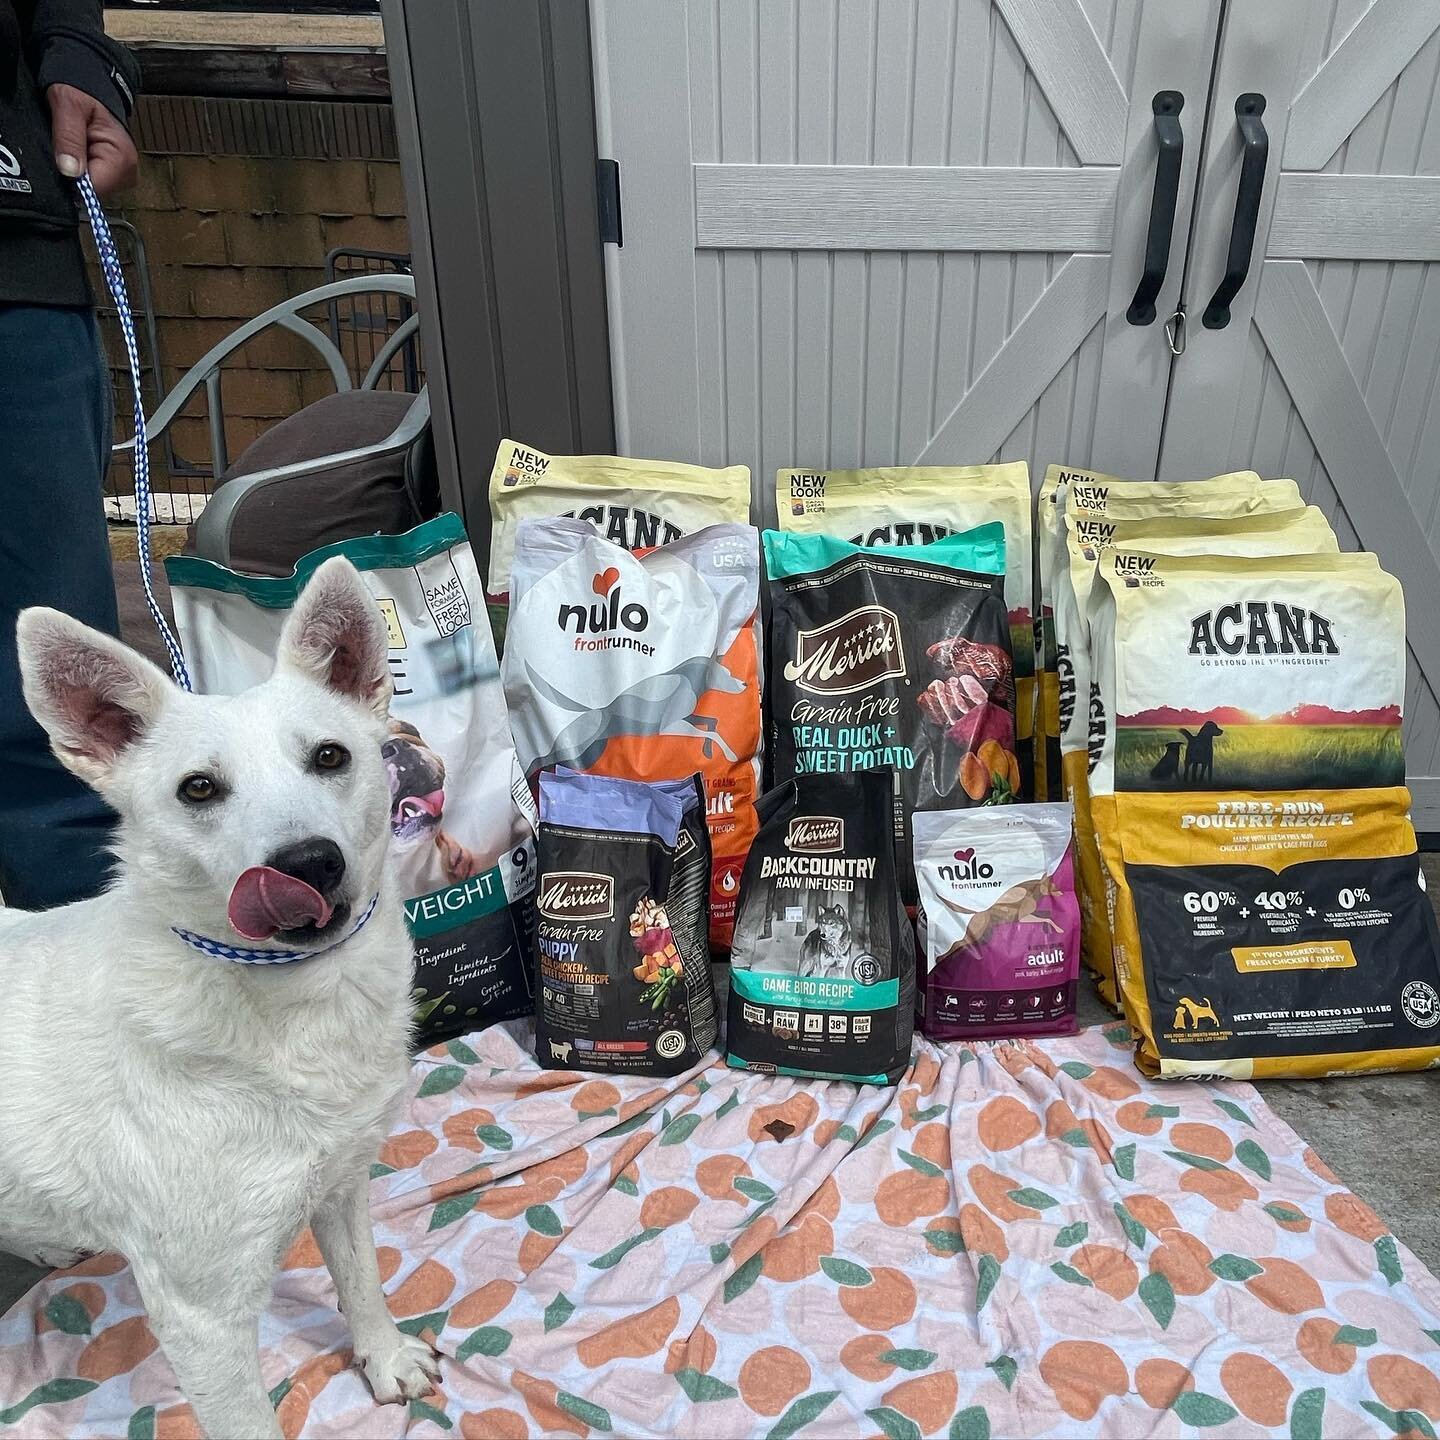 Rita is very excited for these donations from our neighbors @friendsfurever !!! We are so grateful for their donation! Please go check them out!

If you&rsquo;re ever looking for delicious, high value treats or maybe looking to try out some new dog o